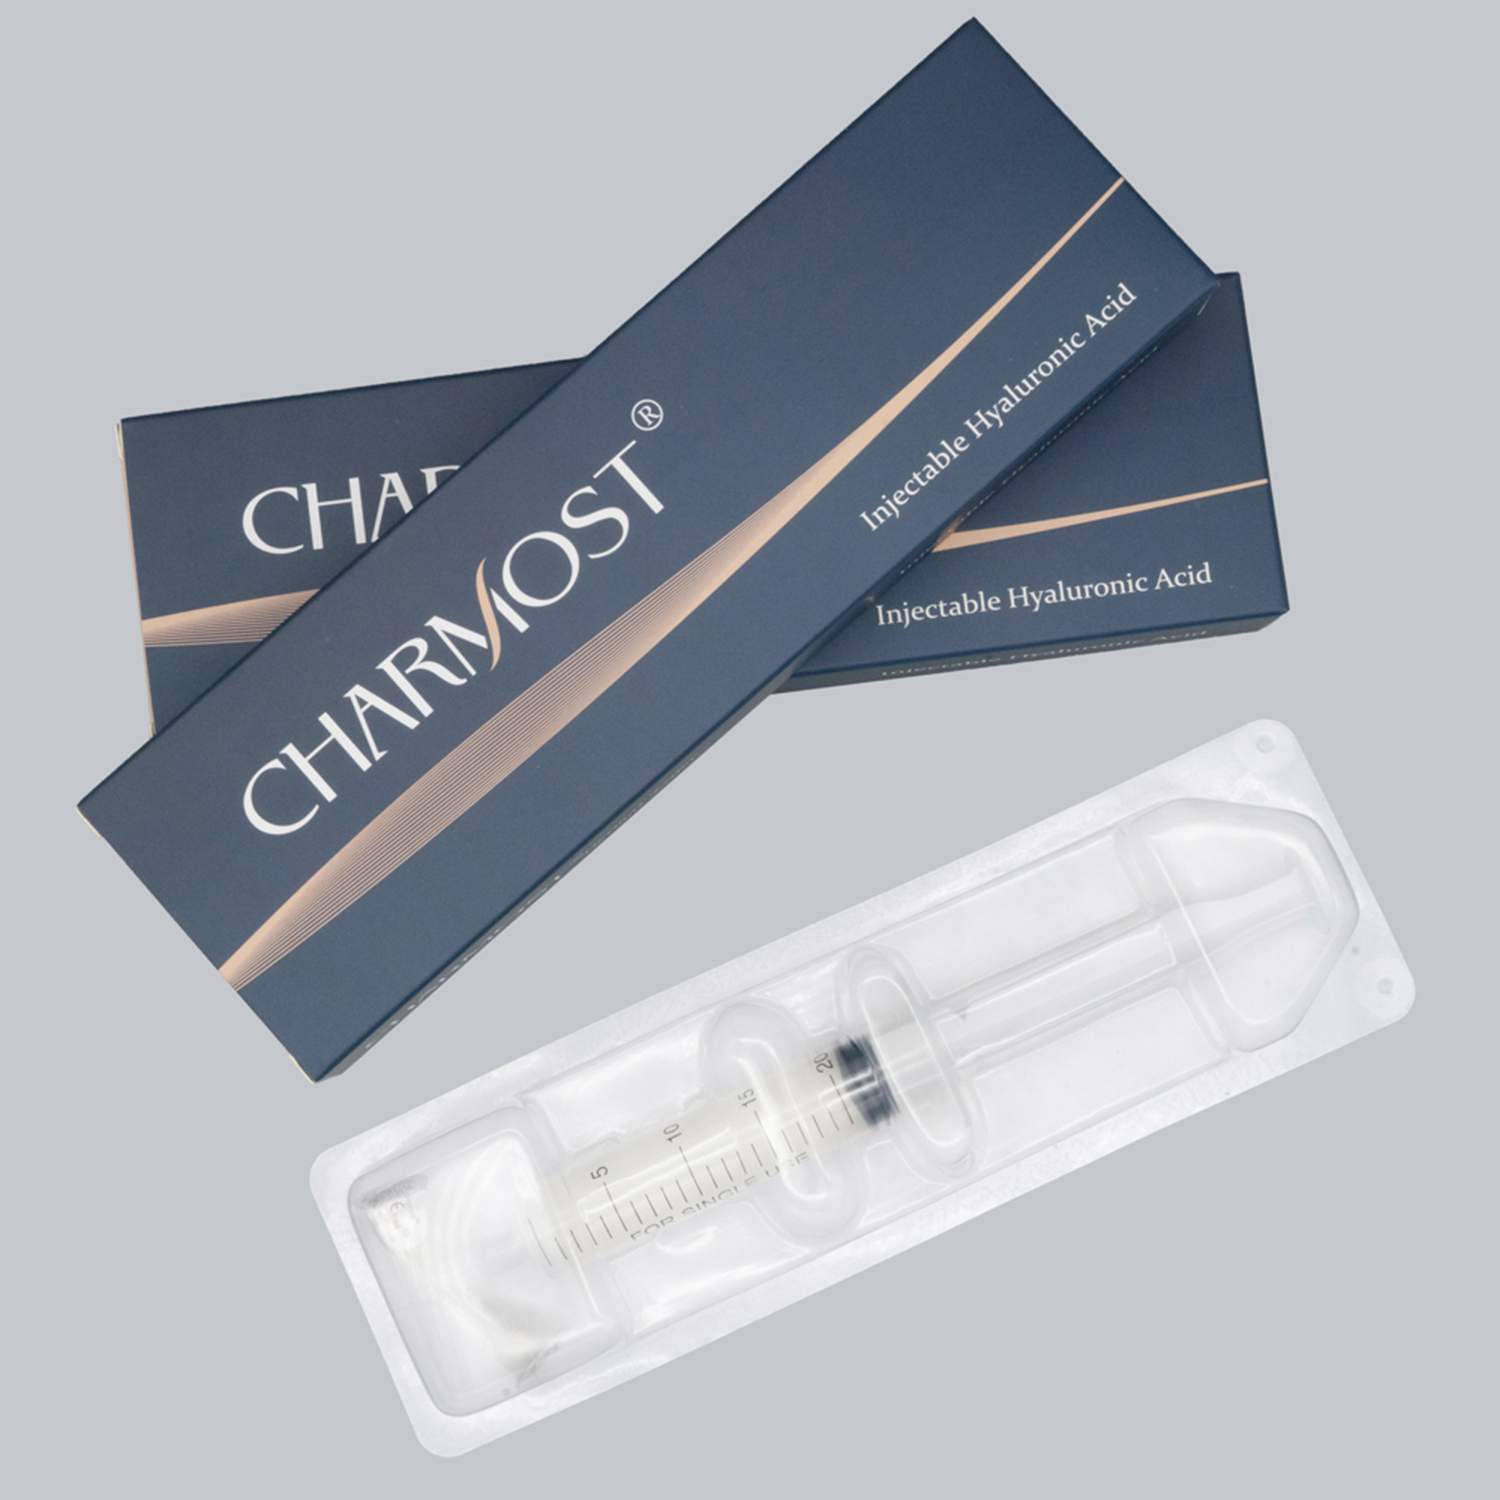 10ml Charmost Ha Injectable Hyaluronic Acid Dermal Filler For Face Use And Breast